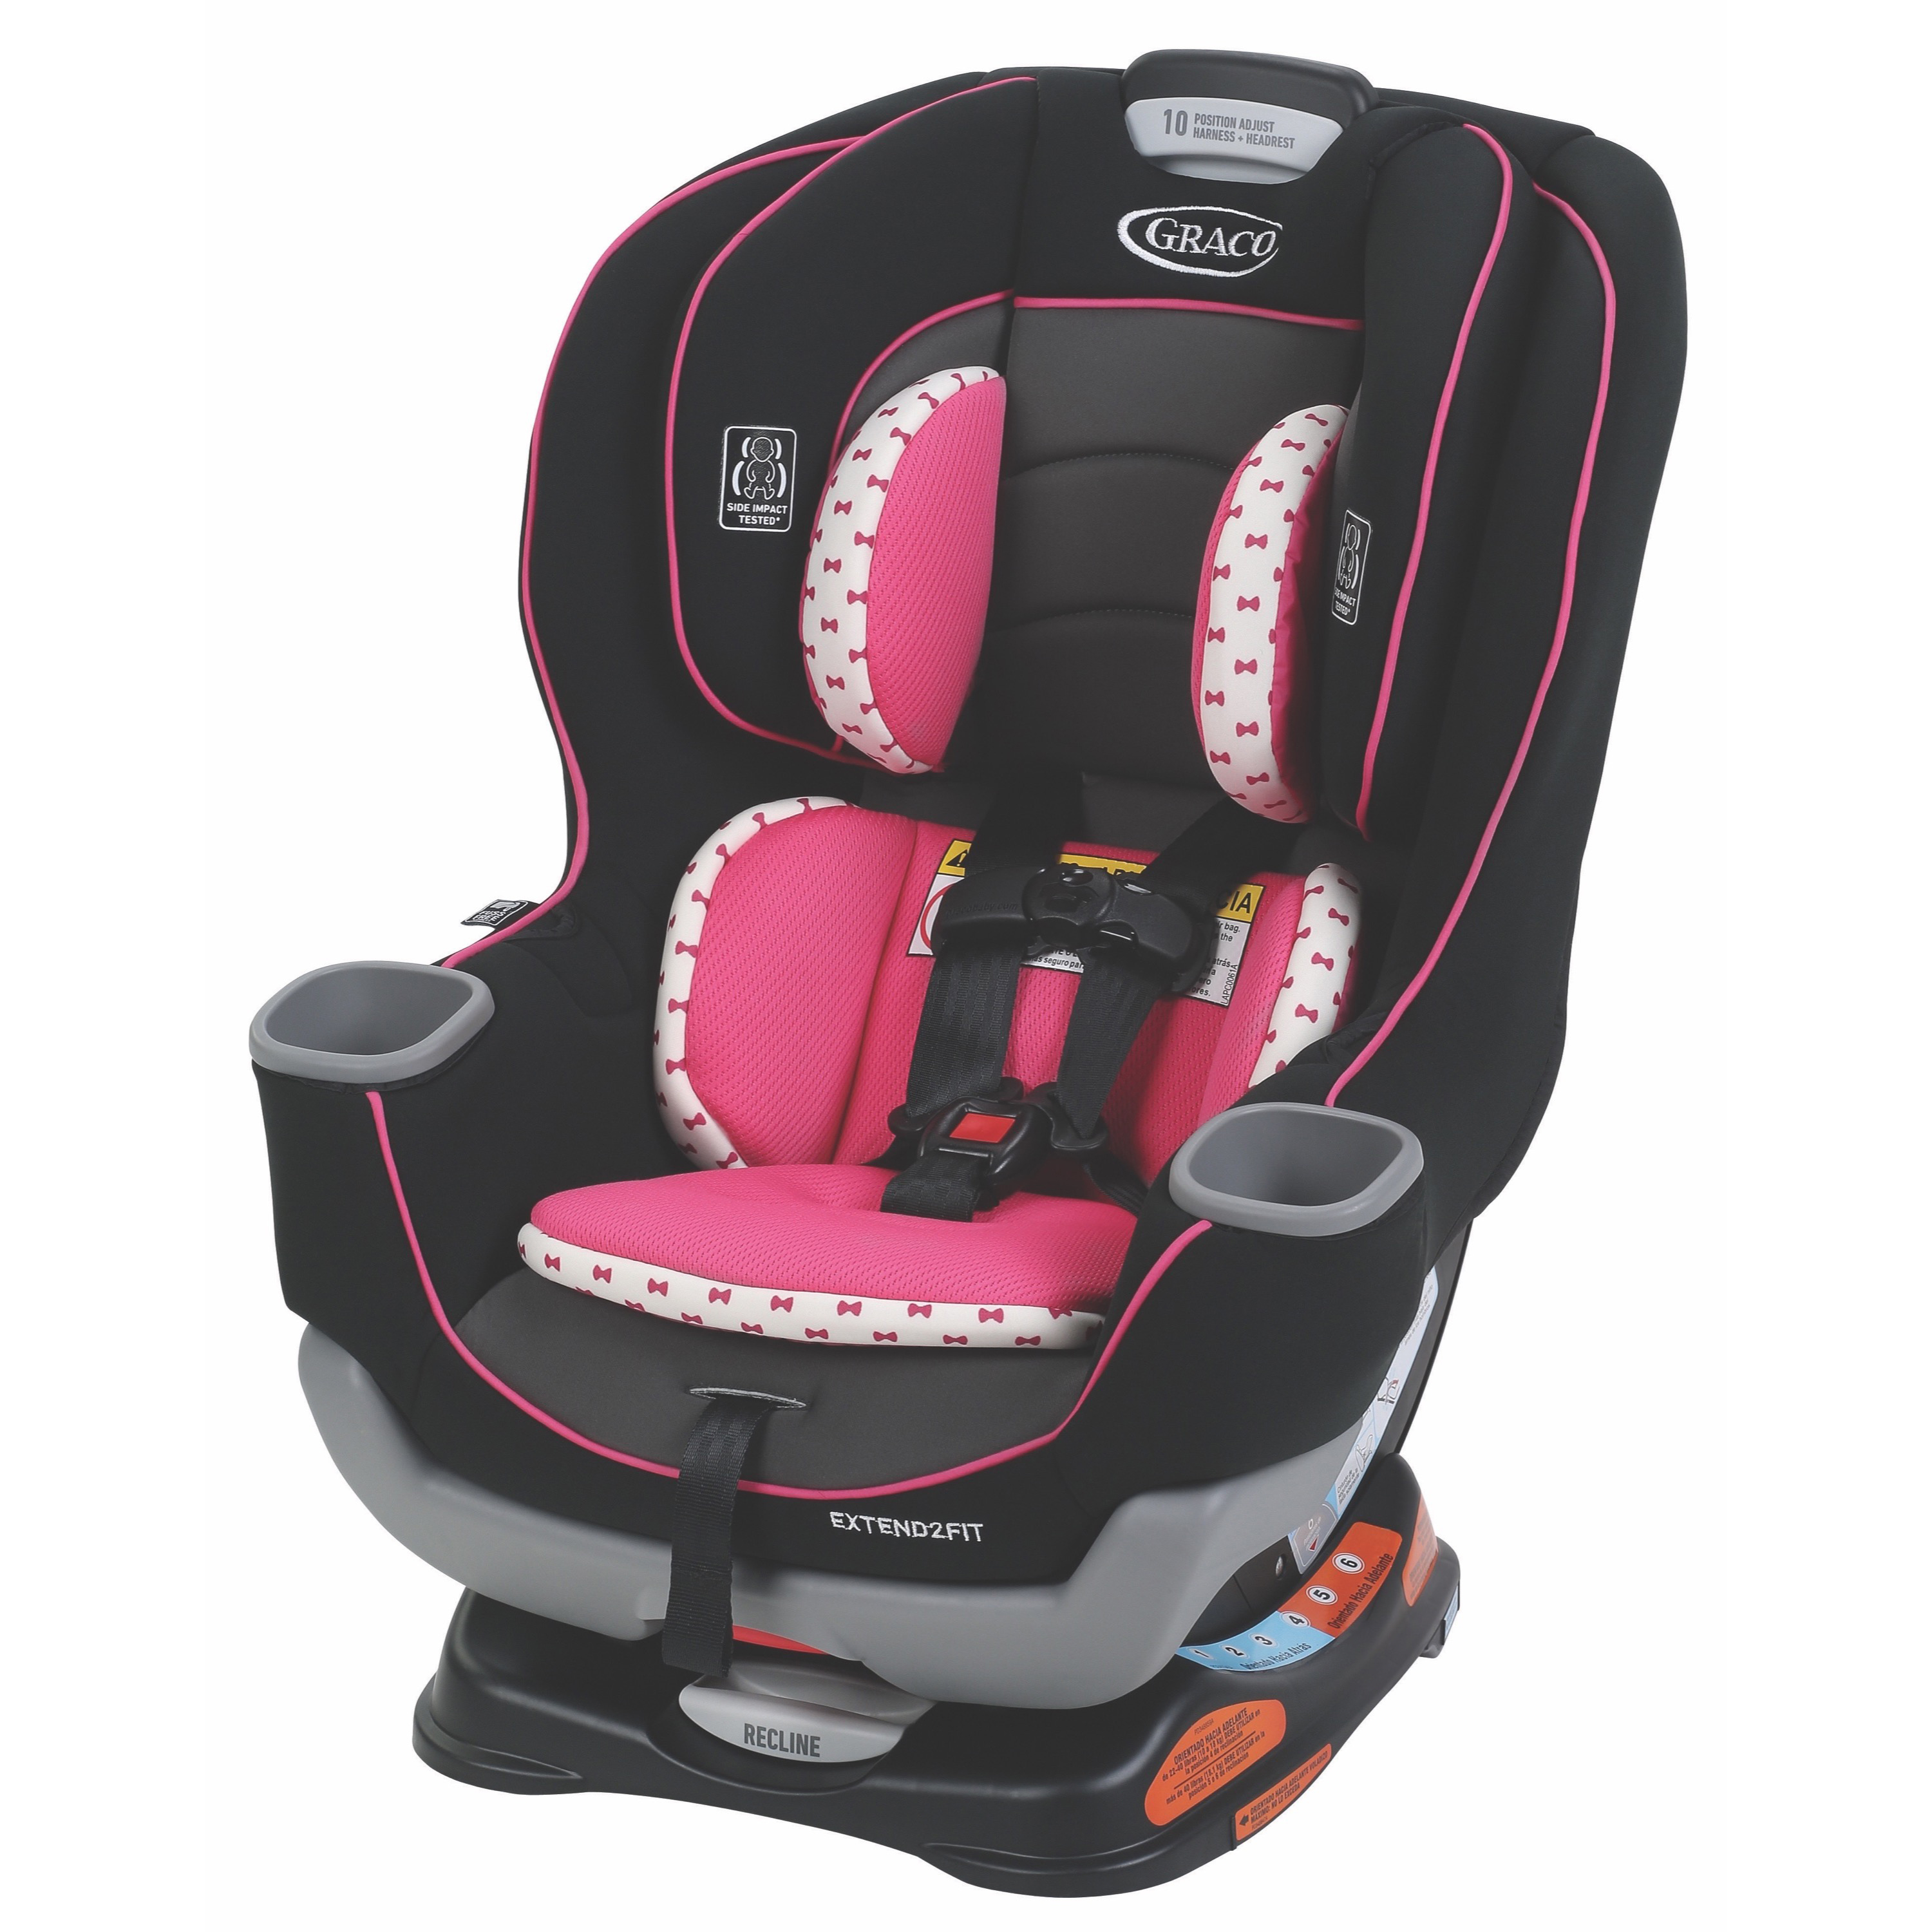 Photo 1 of Graco - Extend2Fit Convertible Car Seat, Kenzie

.
